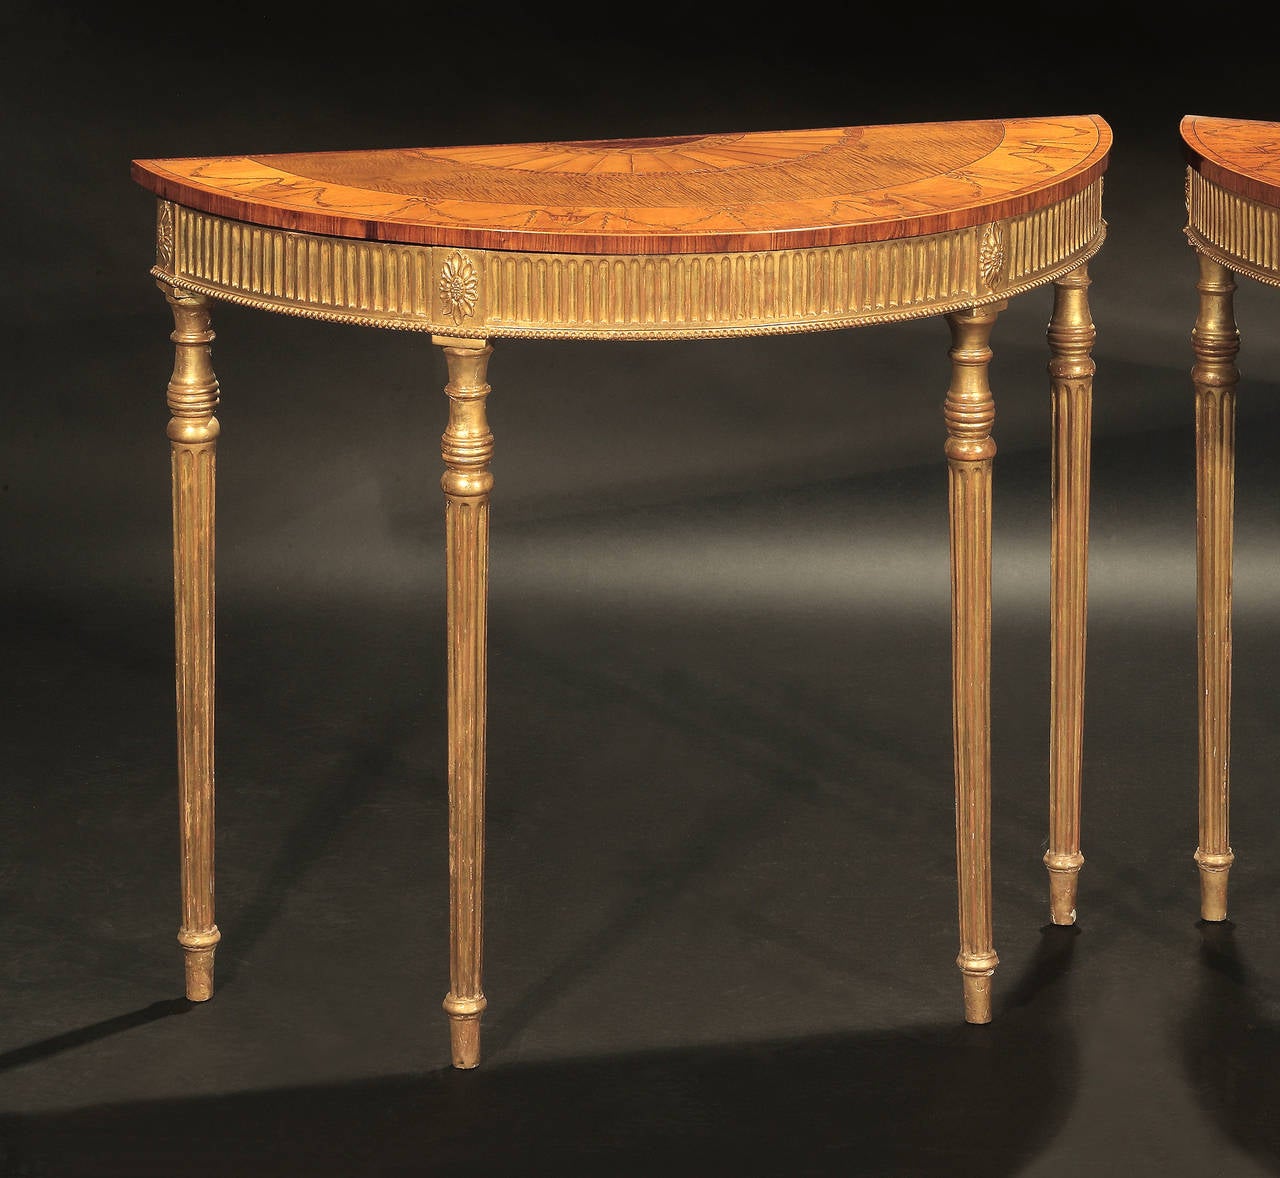 Fine pair of George III giltwood and each top inlaid with an elaborate fan paterae and broad satinwood border with ribbon-tied husk garland and Classical urn decoration, over a fluted frieze with beaded edge; raised on ring-turned fluted tapering